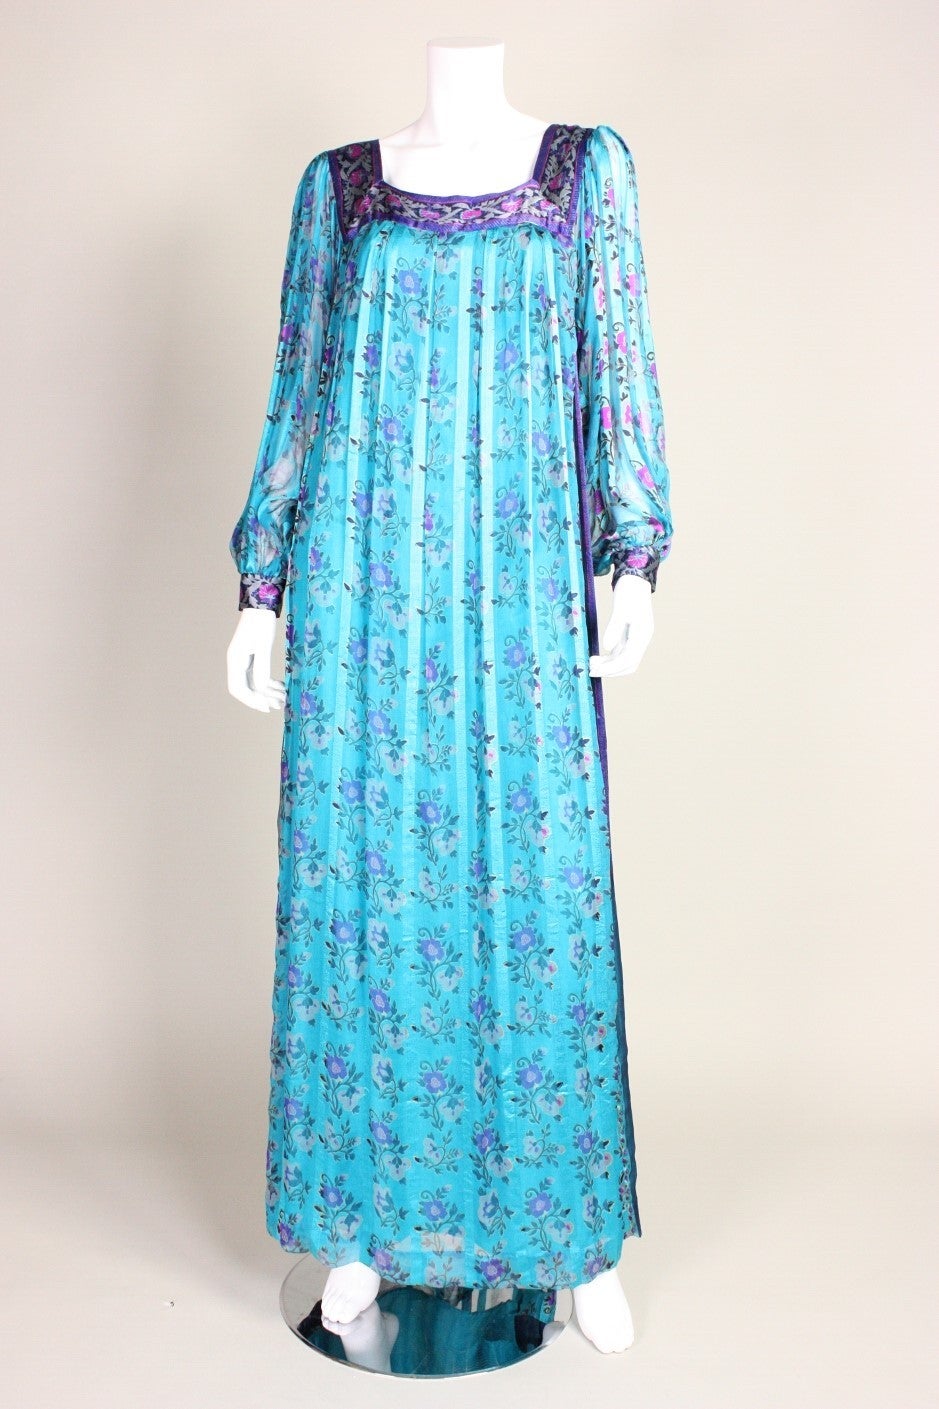 Vintage maxi dress from Raksha dates to the 1970's and is made of printed turquoise silk chiffon. Squared scoop neckline. Long sleeves button at the cuffs. Lined except for in sleeves. Center back zipper.

Labeled size